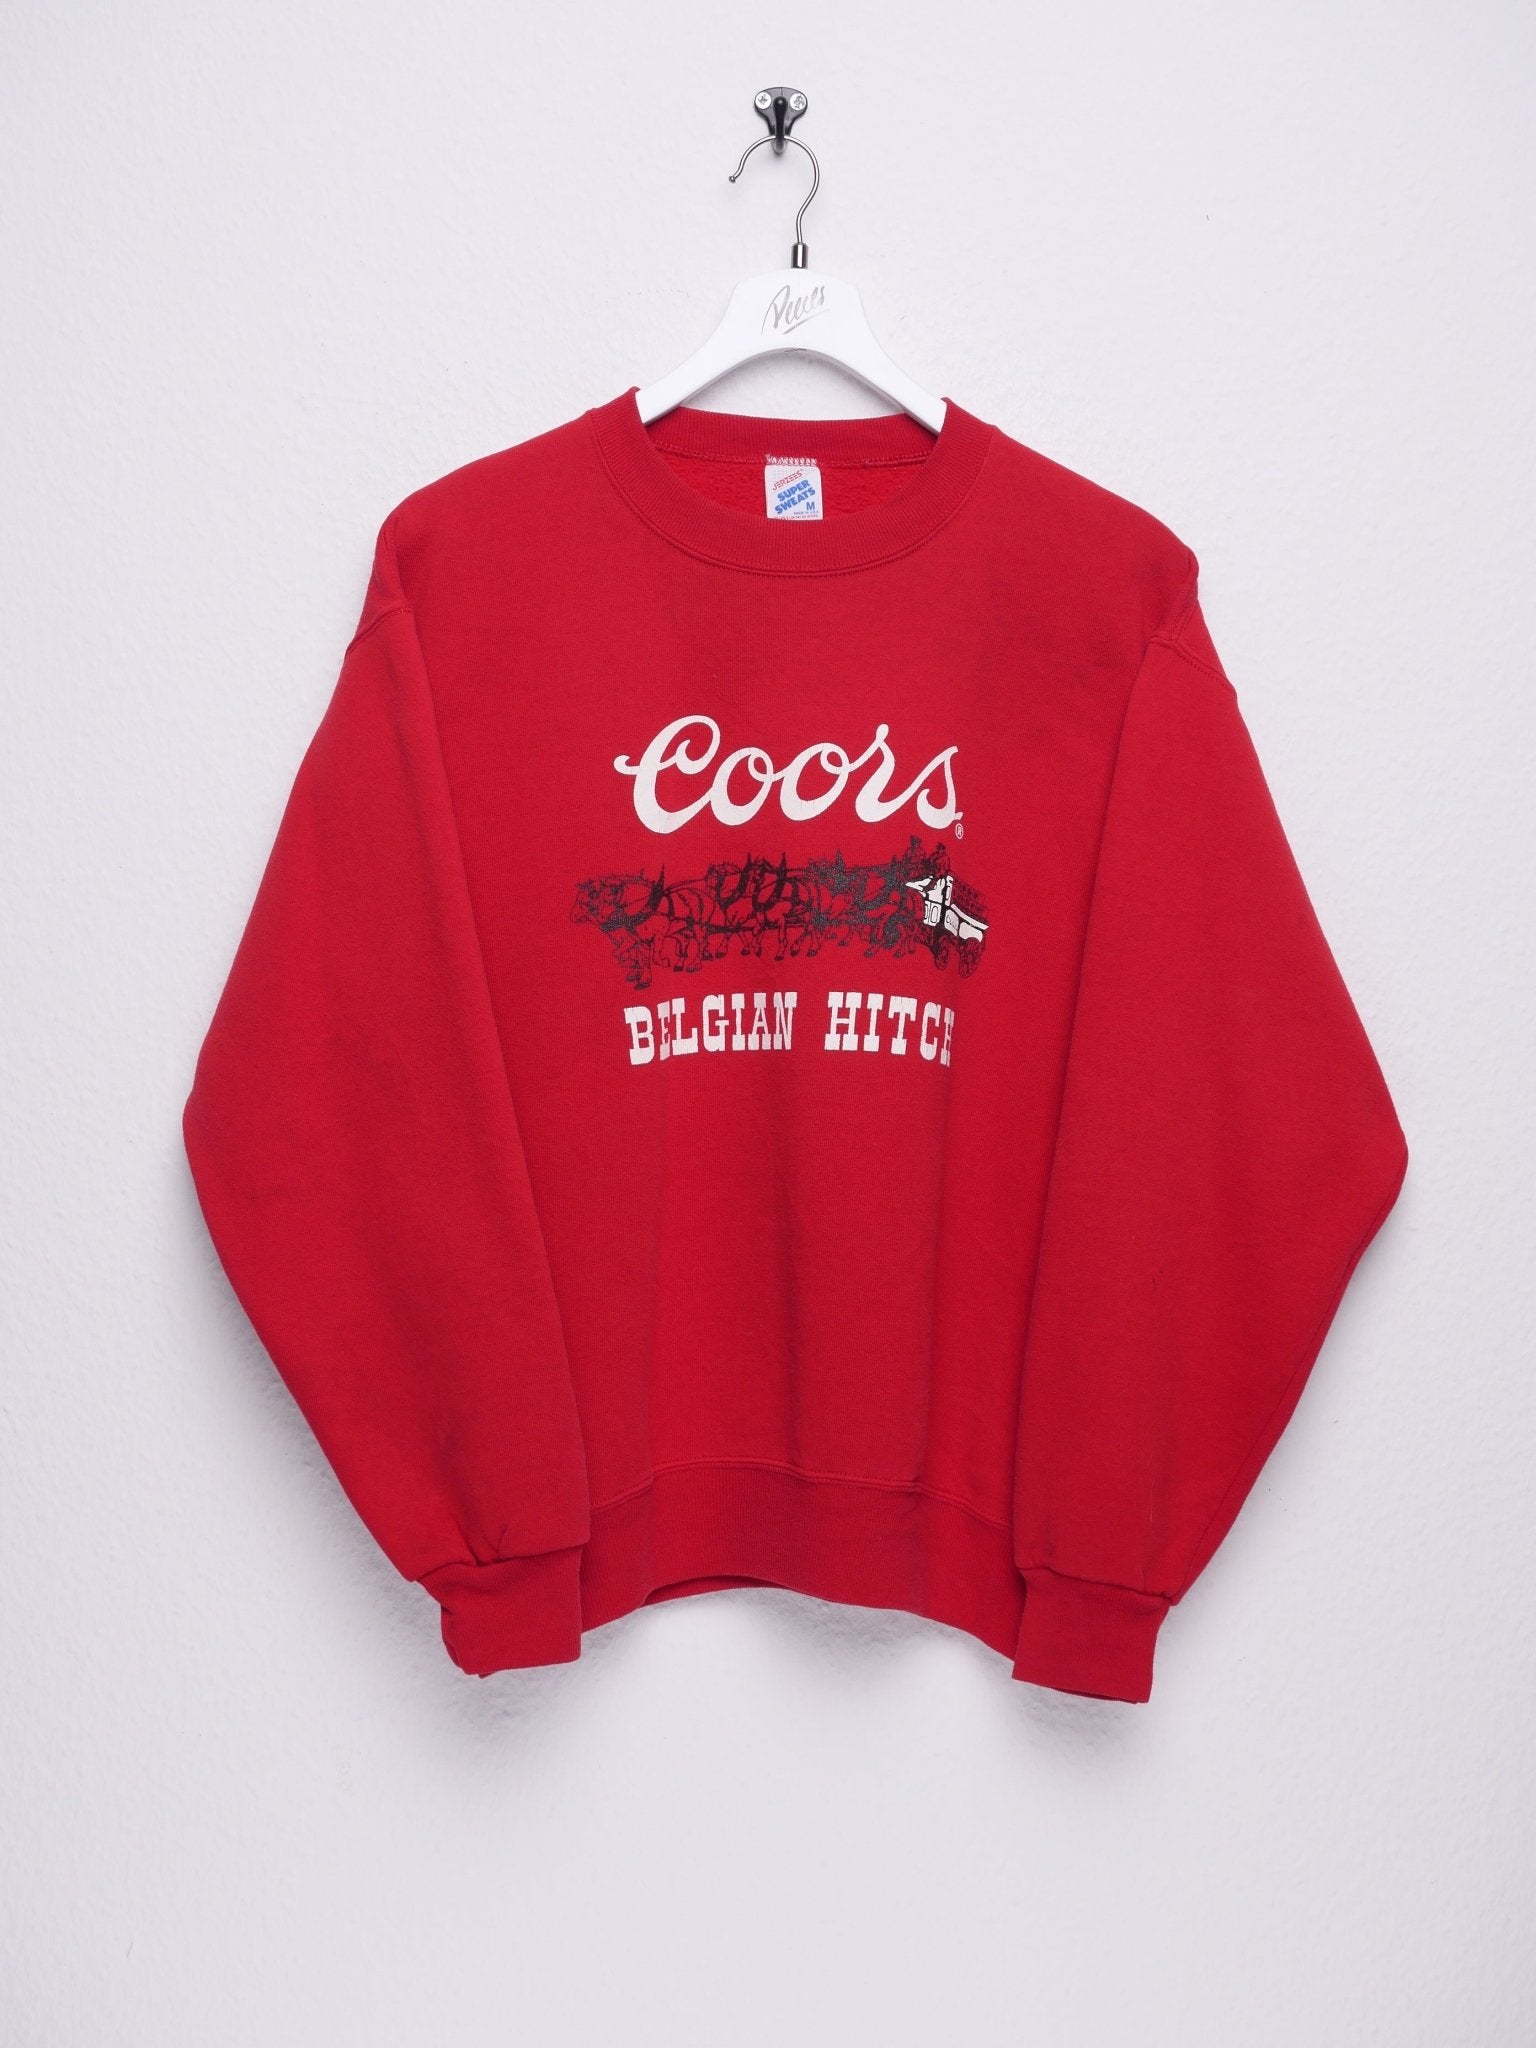 Coors Belgian Hitch printed red Sweater - Peeces